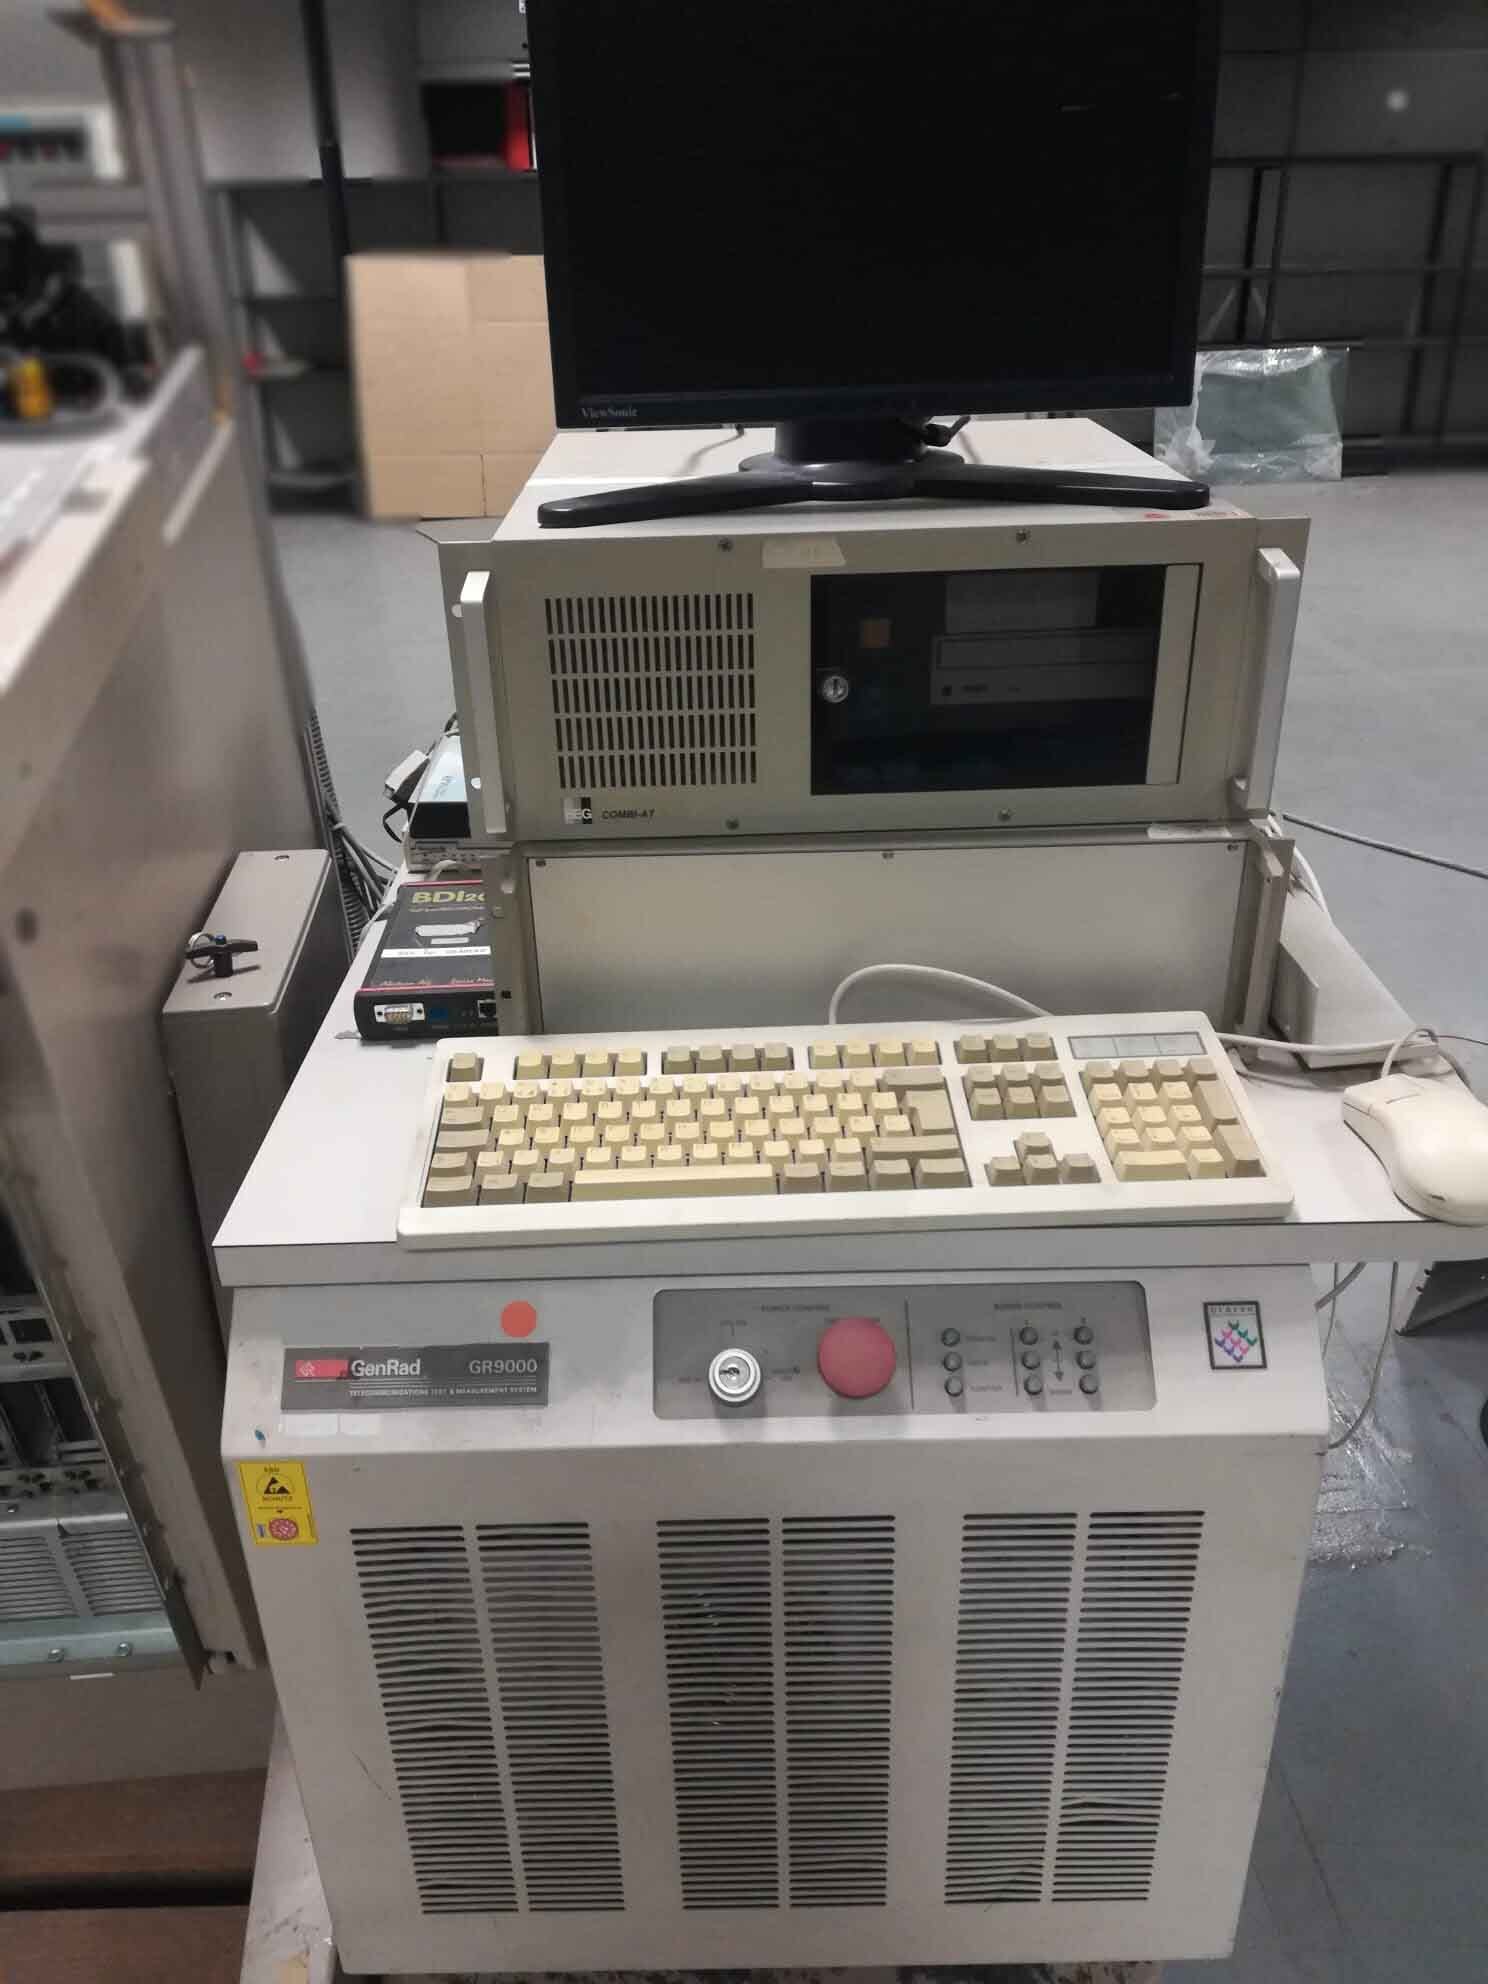 Photo Used GENRAD 9000 For Sale